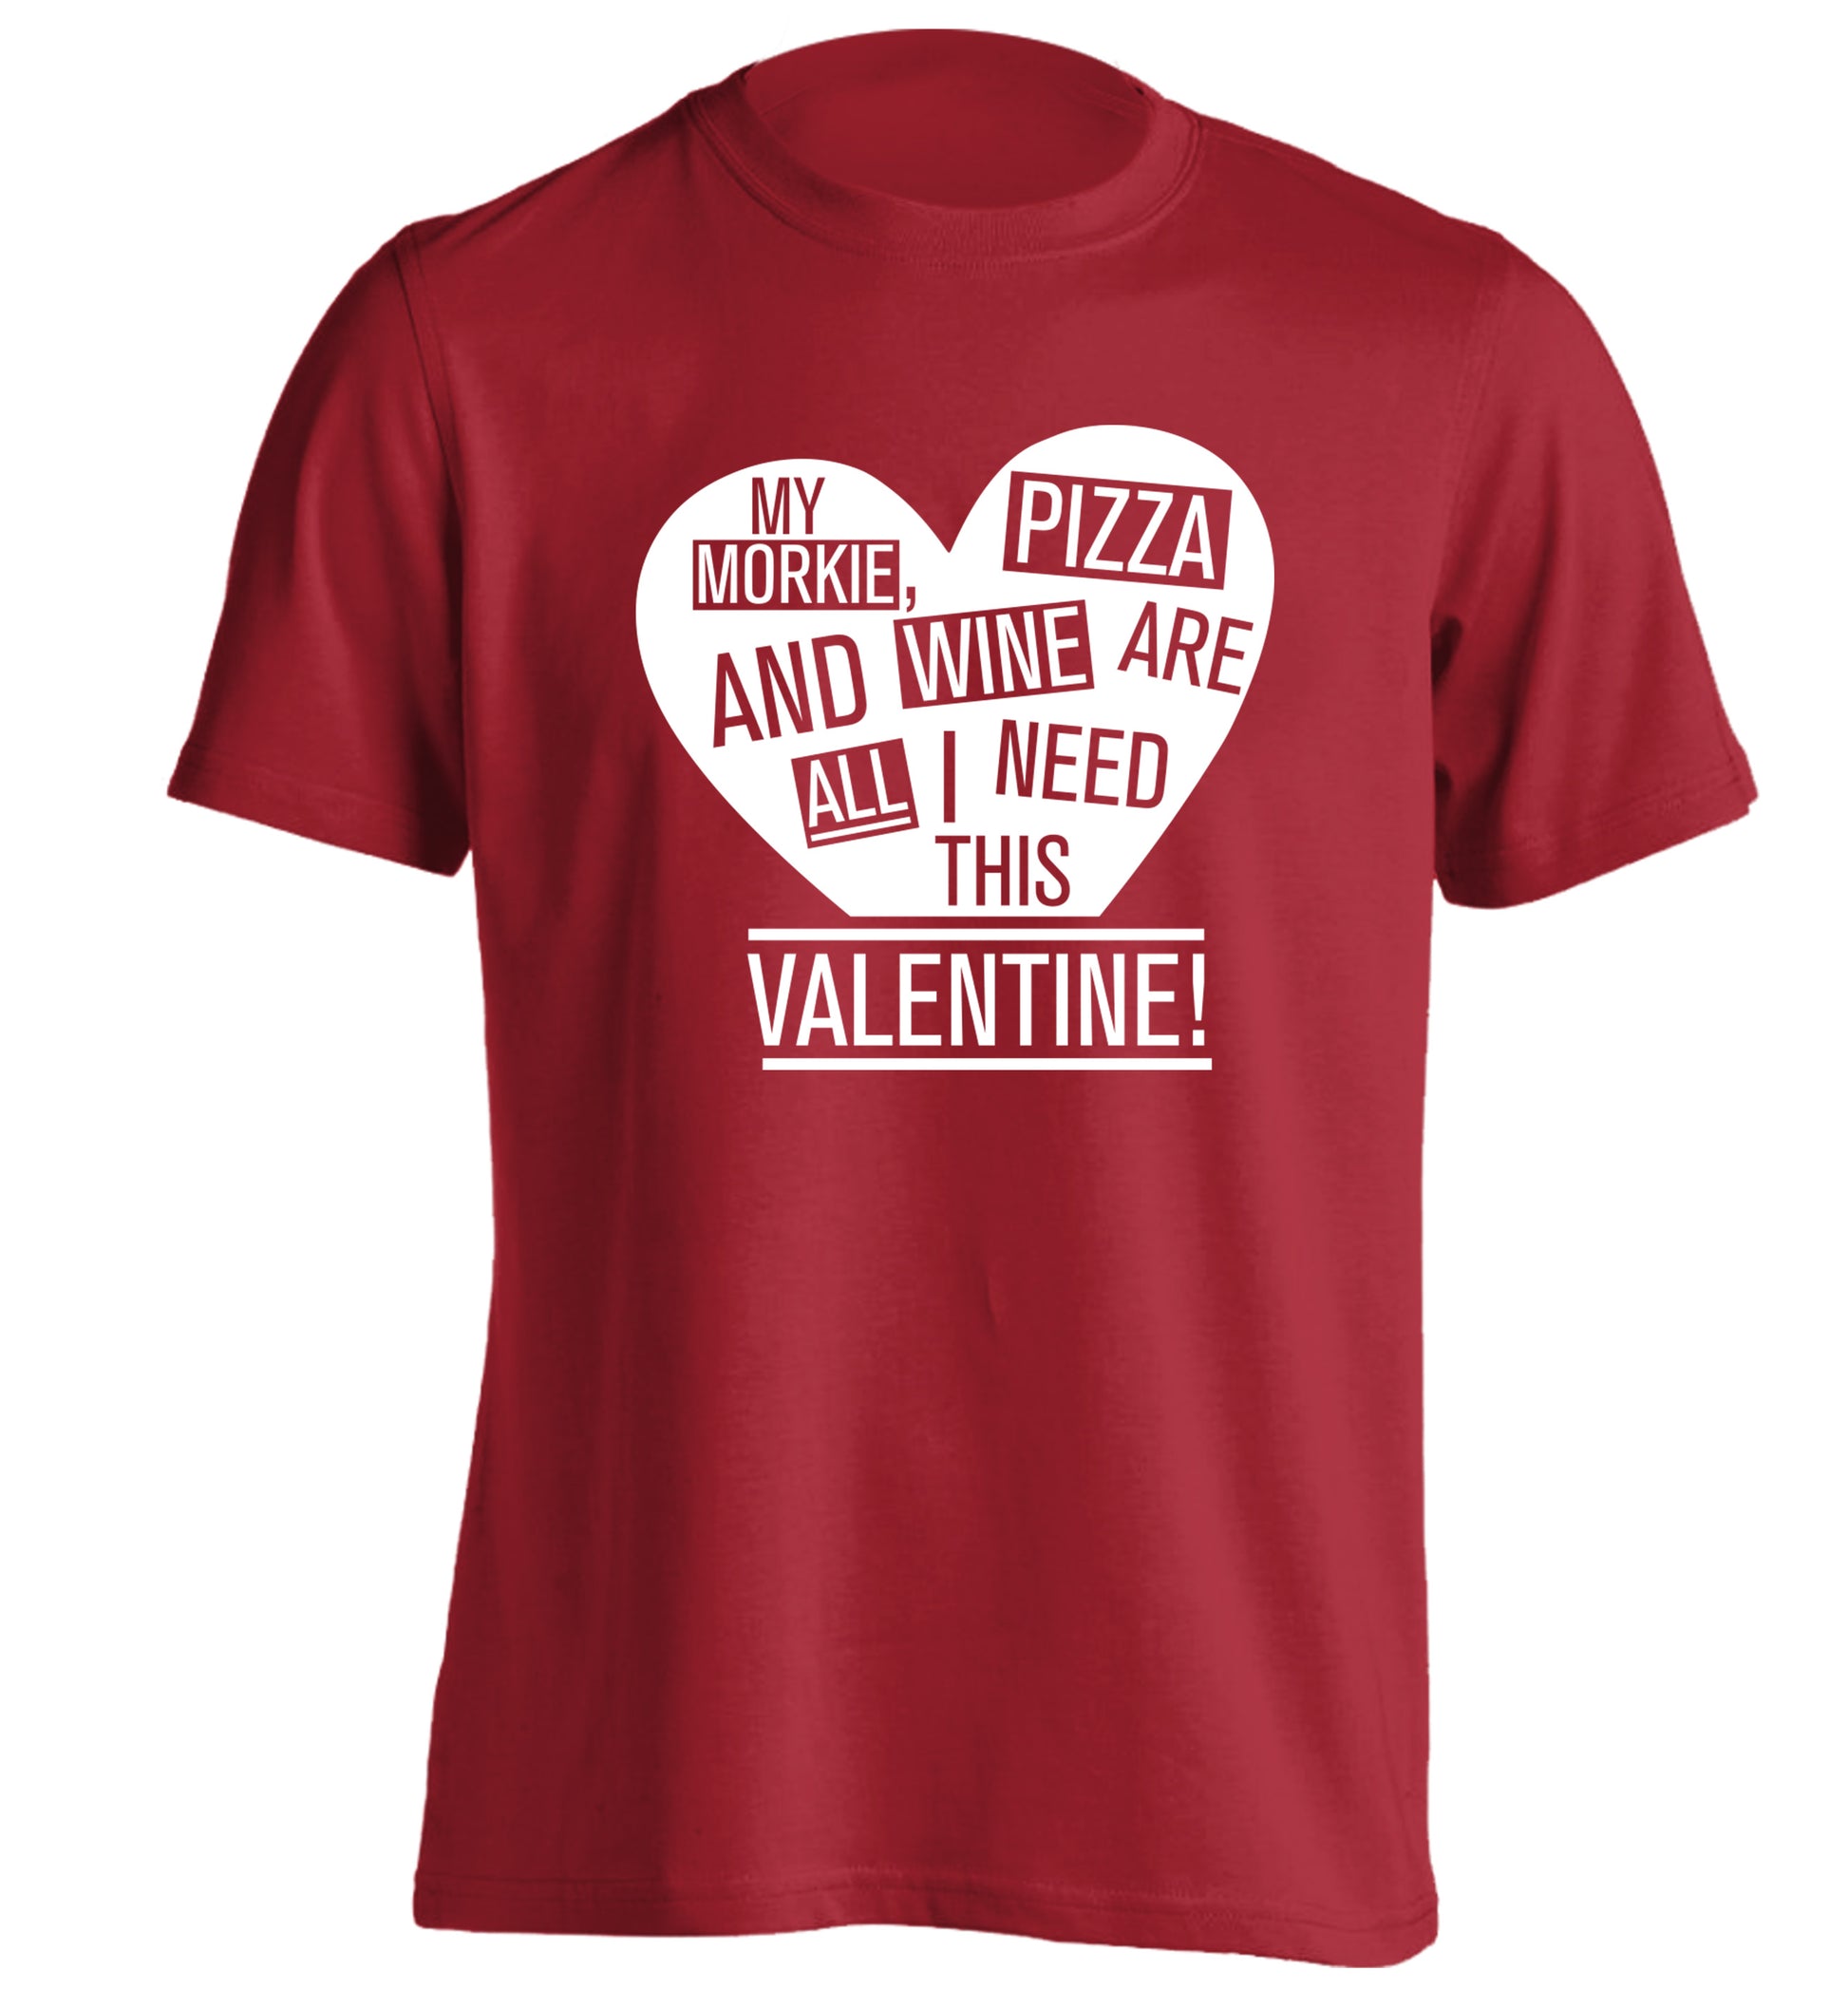 My morkie, pizza and wine are all I need this valentine! adults unisex red Tshirt 2XL